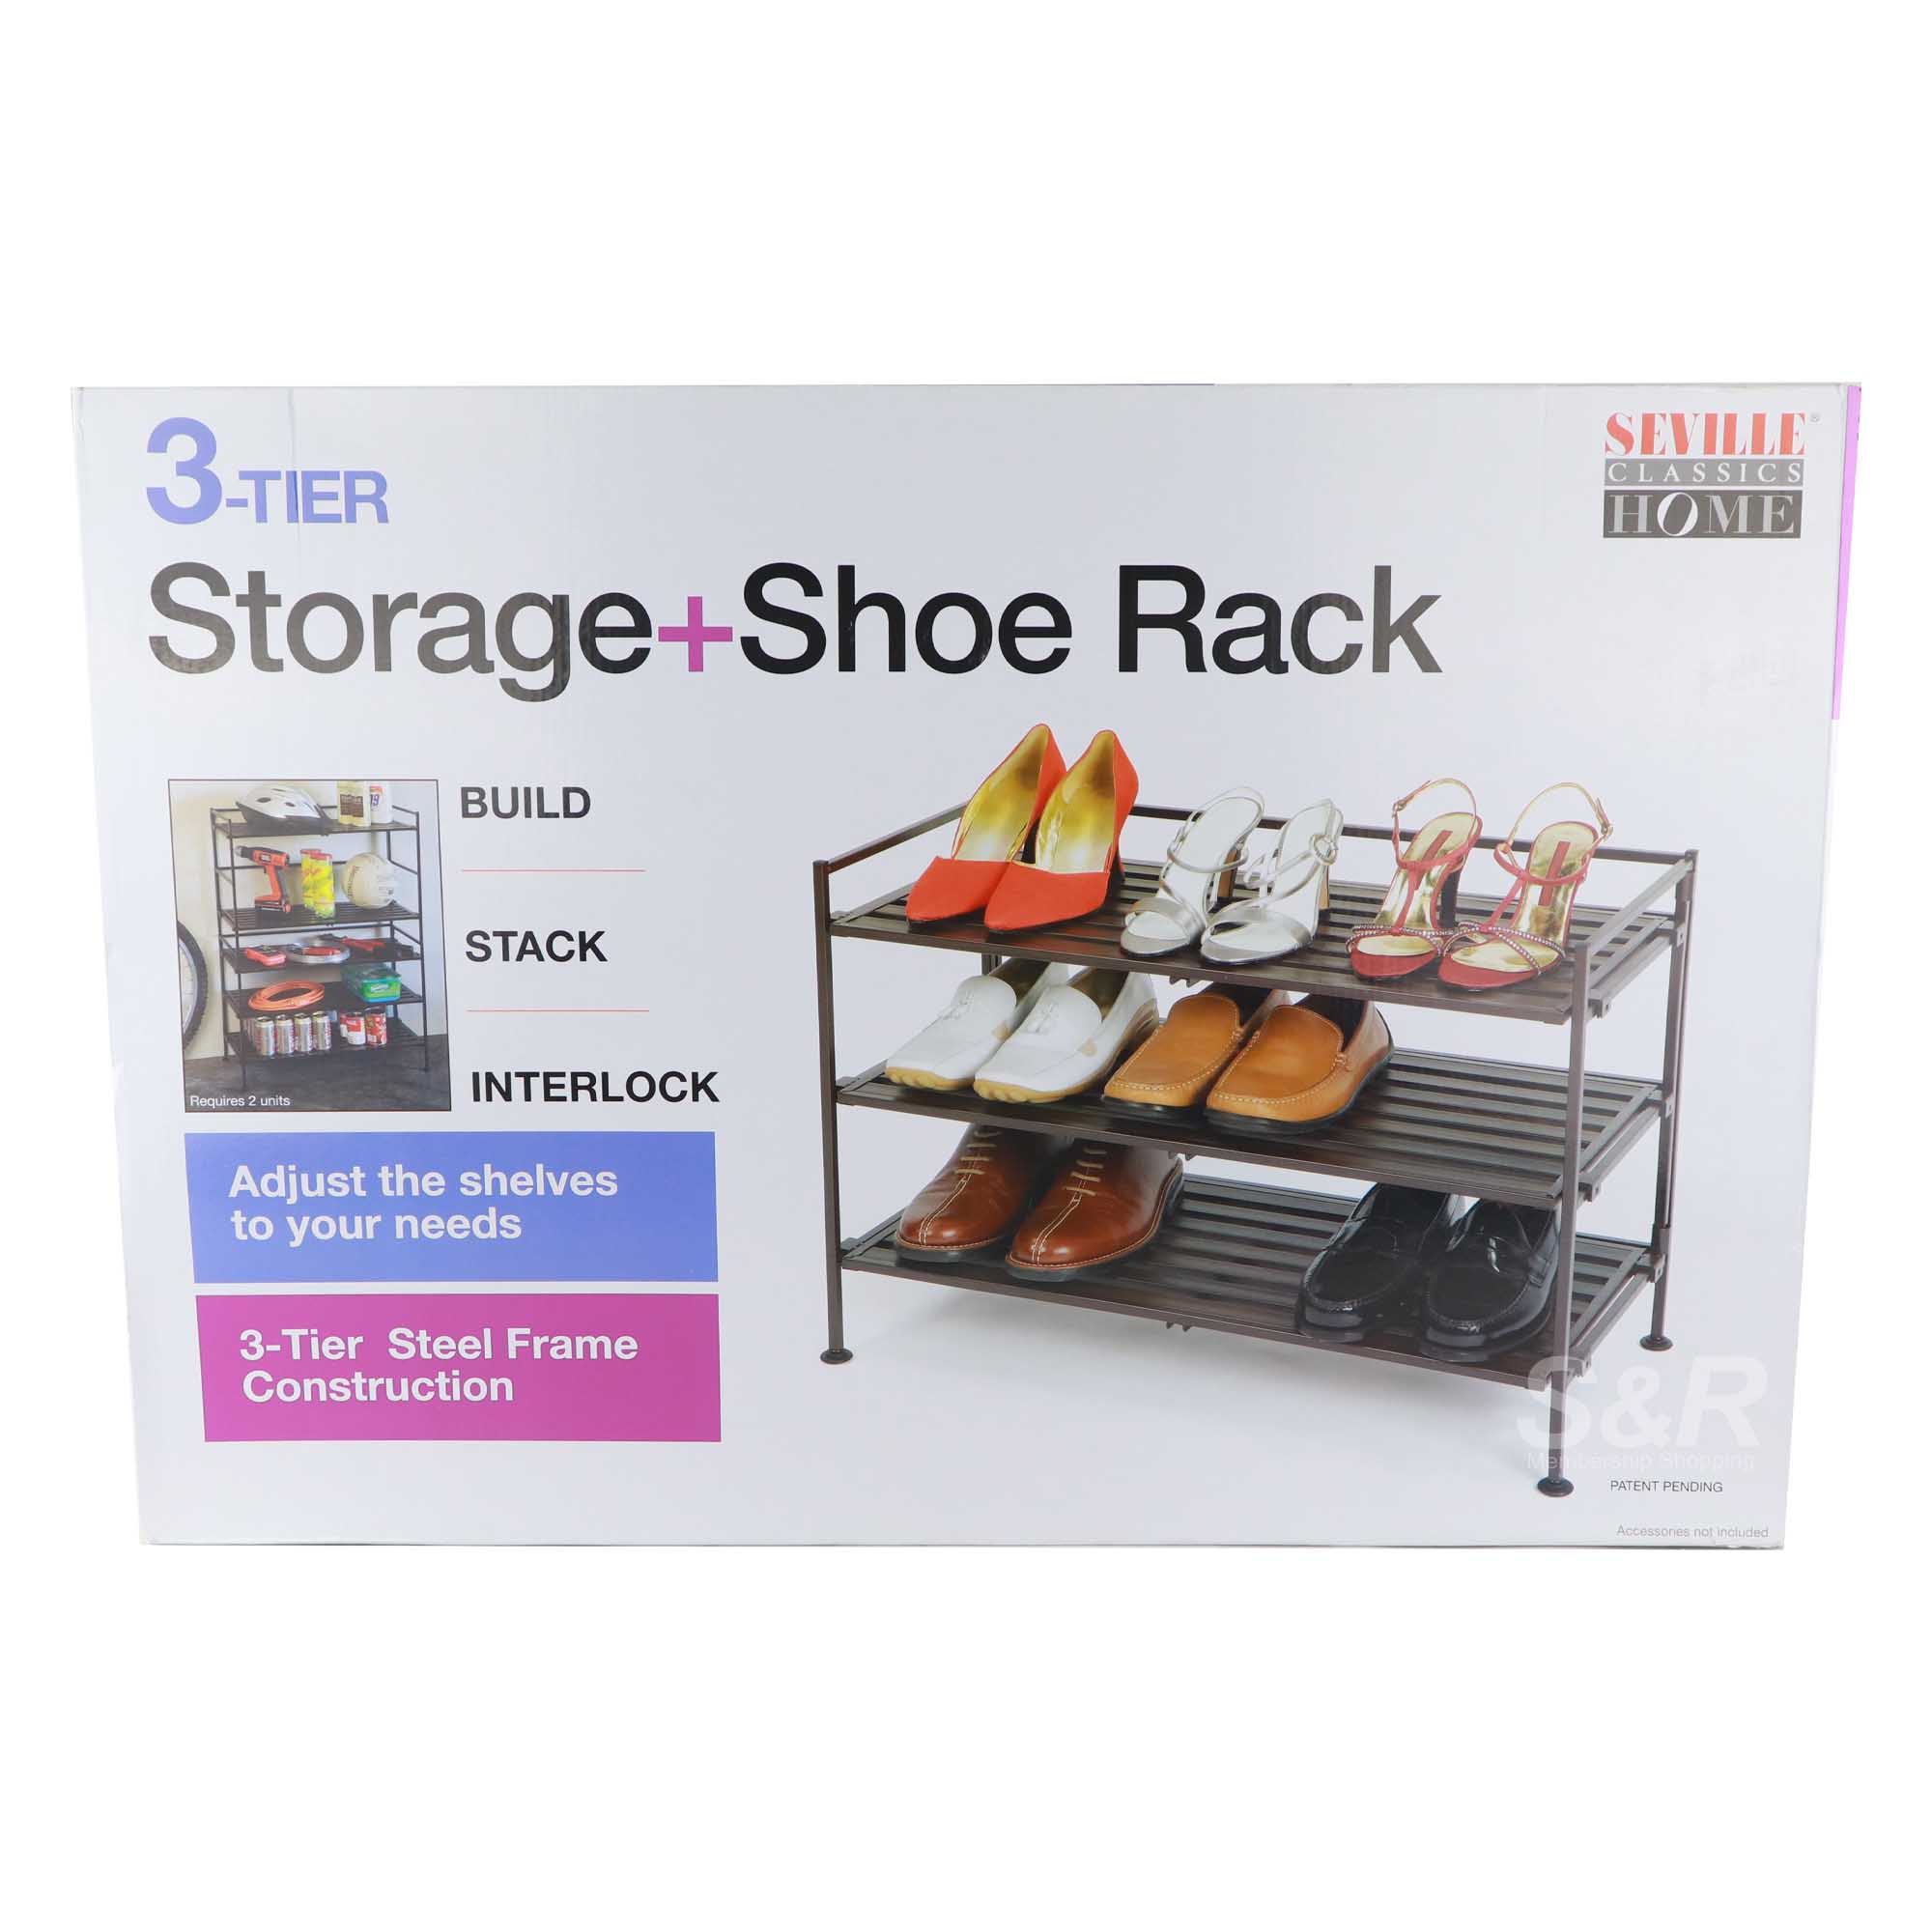 Seville 3-tier Storage and Shoe Rack 1pc